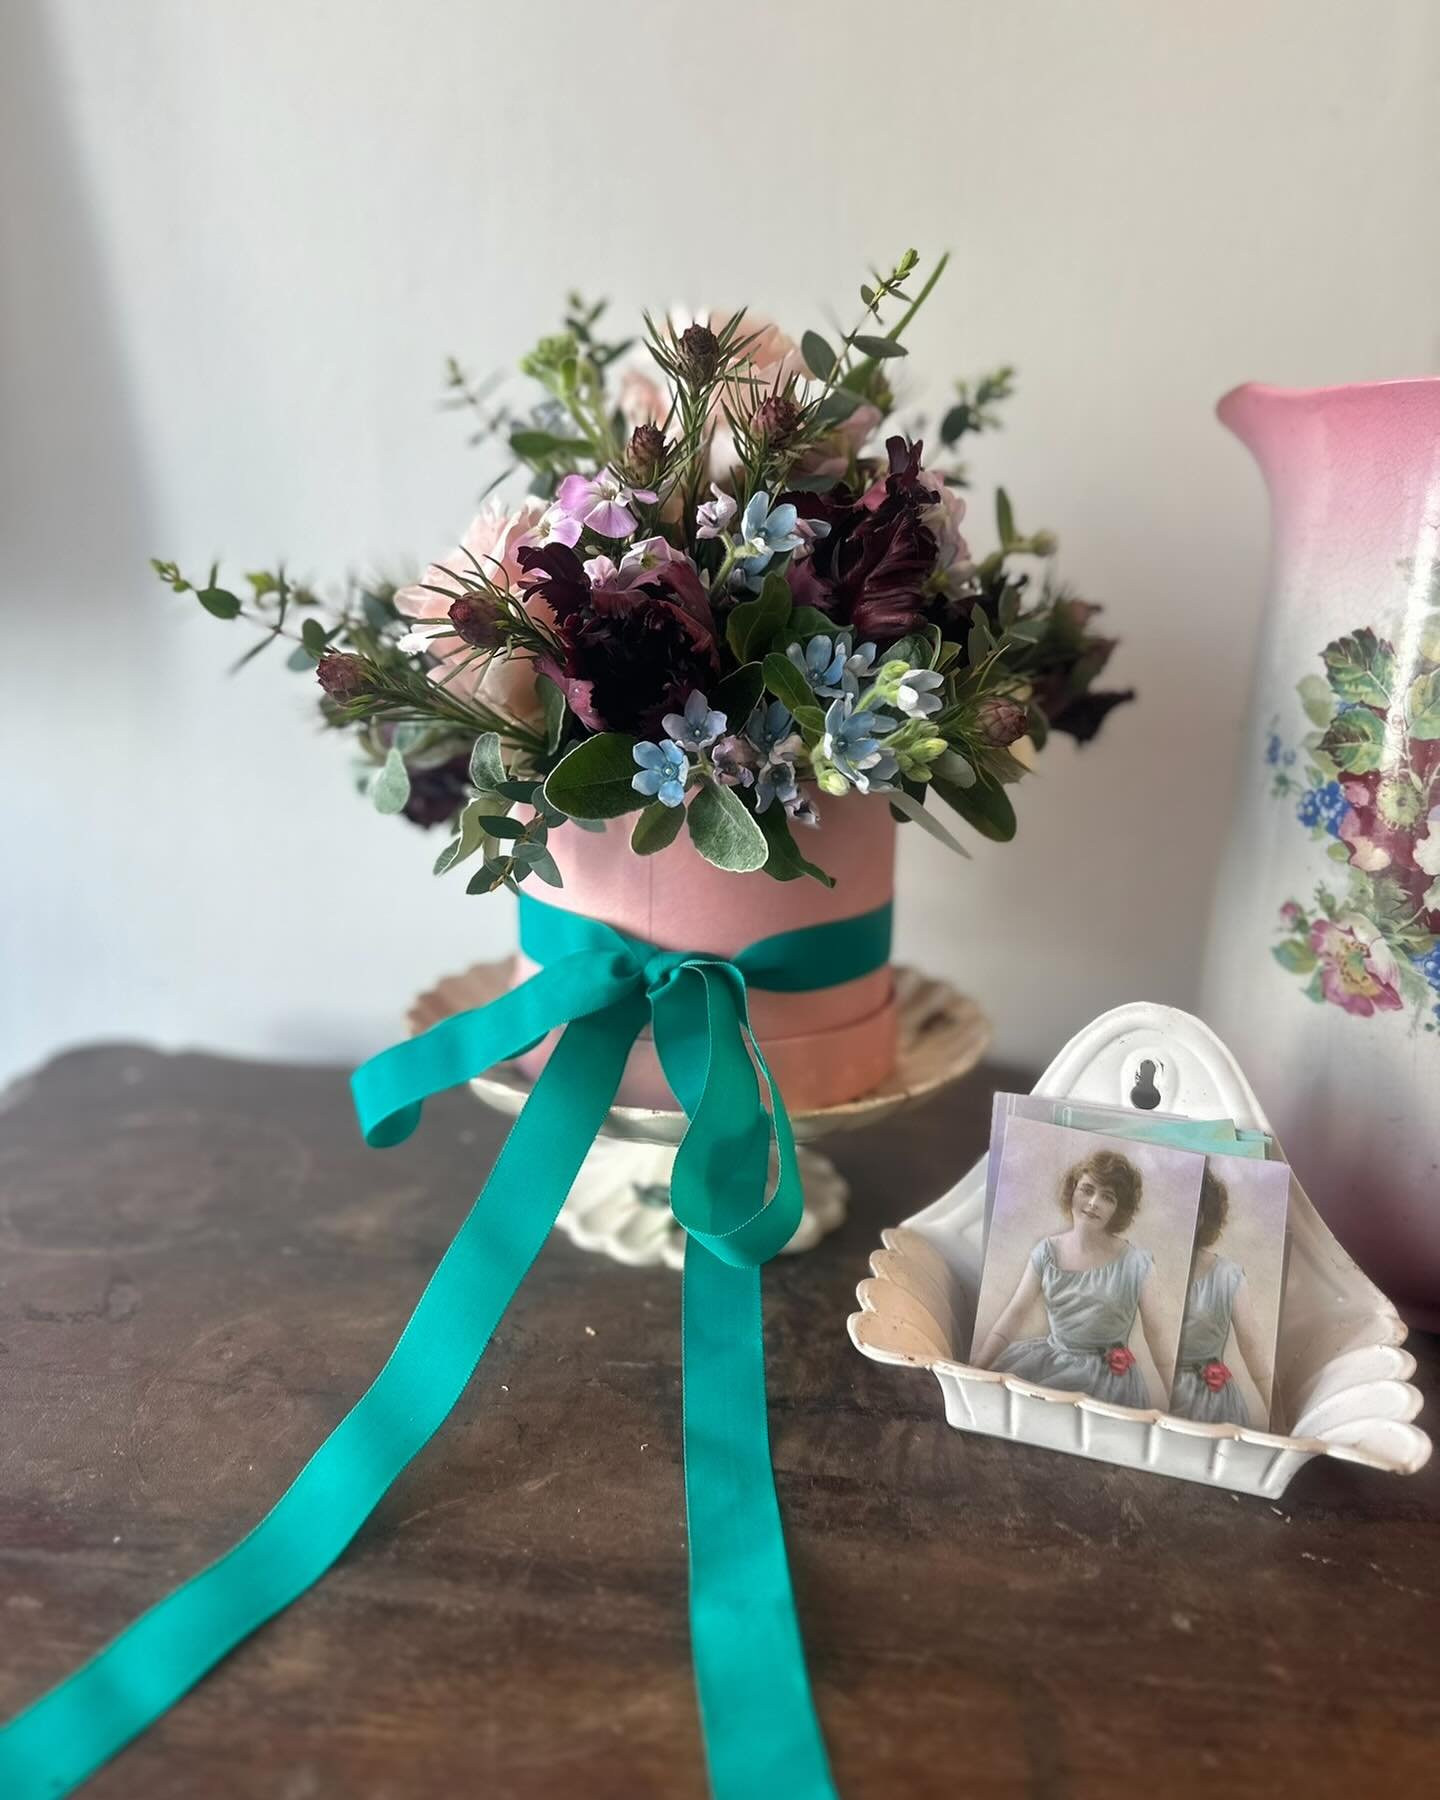 Hat box bouquet by @katelangdaleflorist 💝💐

My Beautiful seasonal flowers arranged in a cute hat box ~  no vase needed, no looking for the right shaped vase or worrying about water if you need to travel with your flowers. 

My hat box bouquets are 